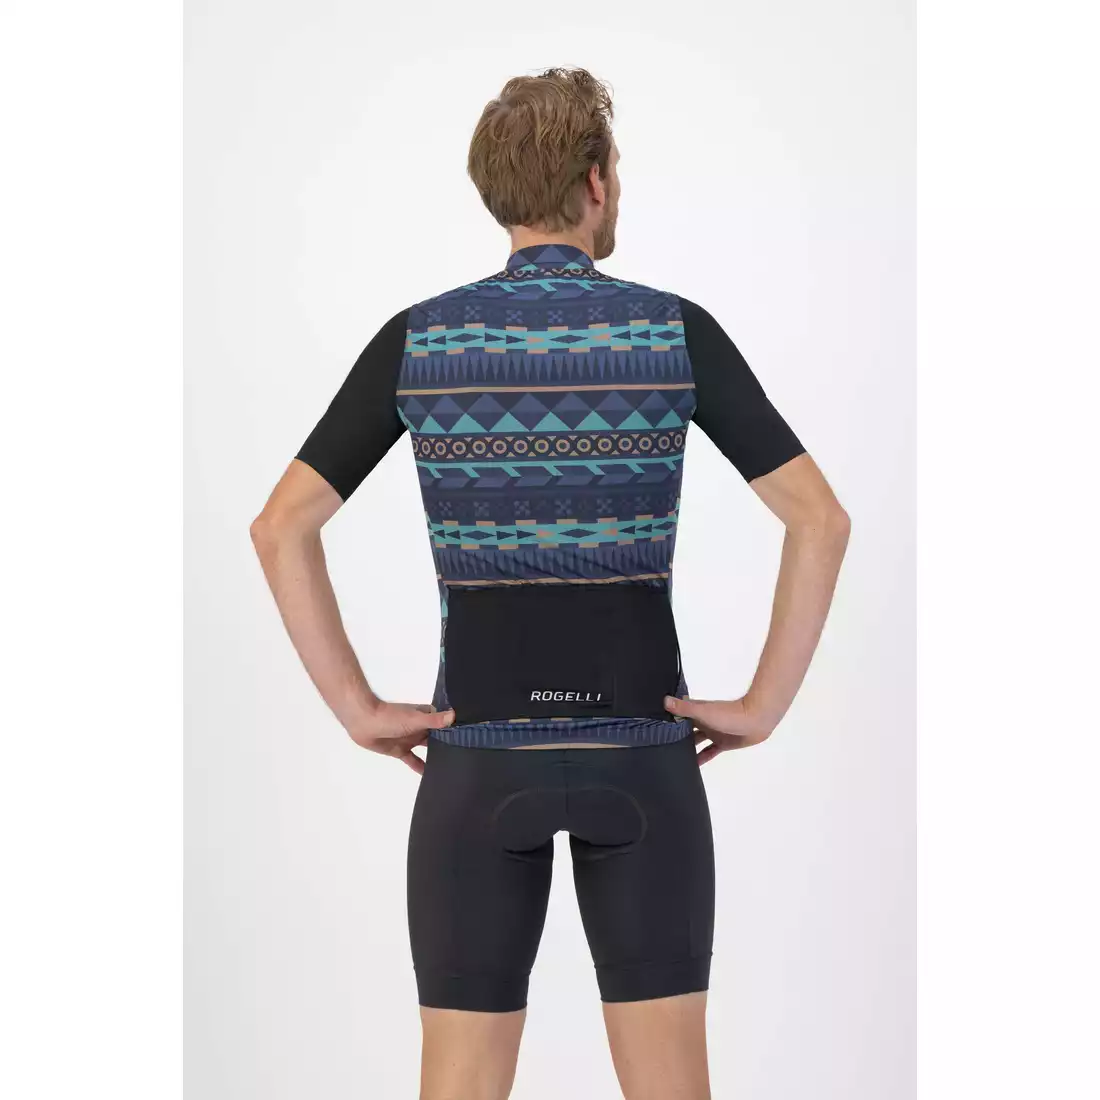 ROGELLI AZTEC men's cycling jersey blue and beige